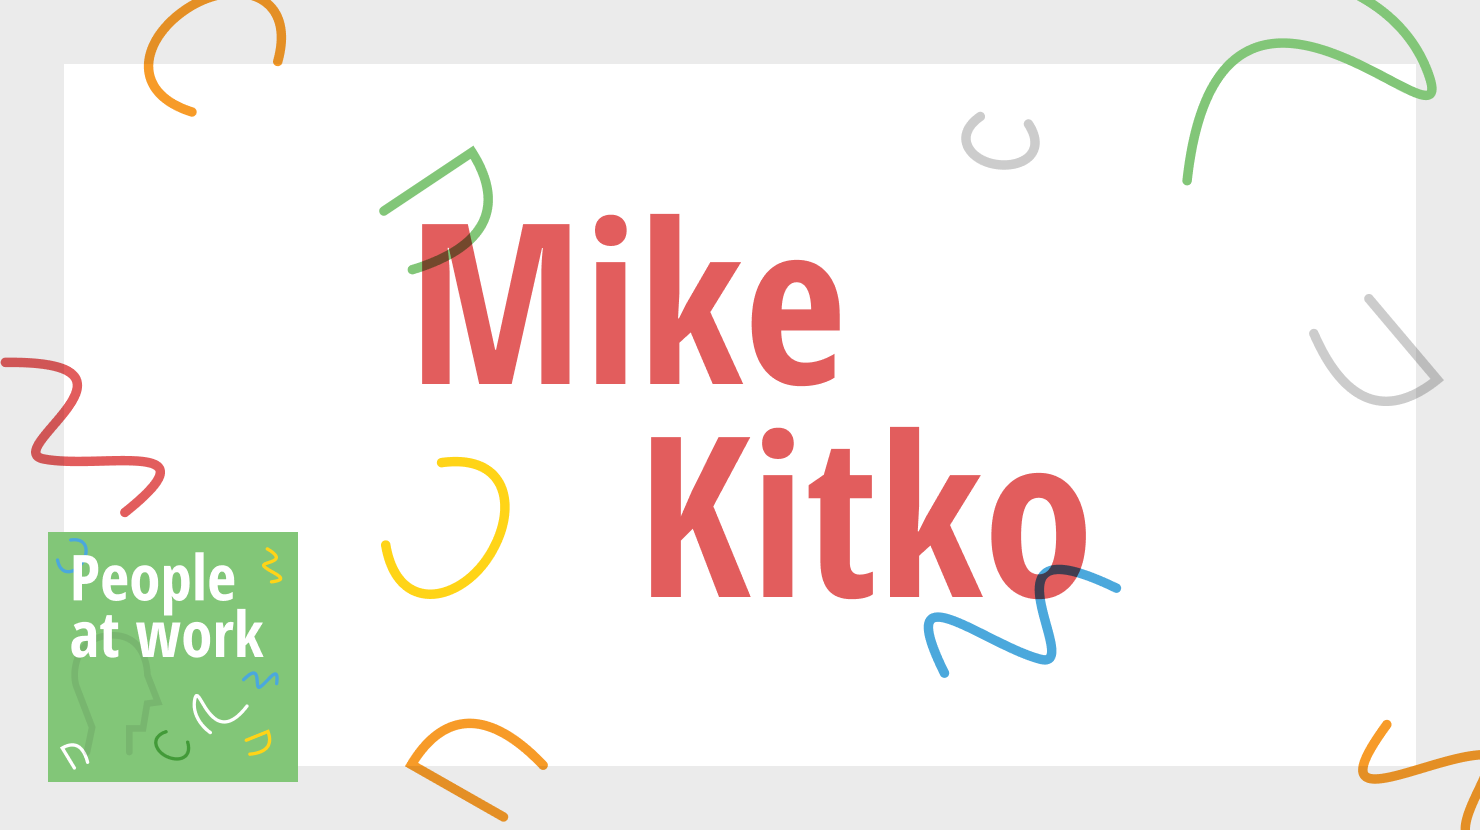 The imposter in charge with Mike Kitko